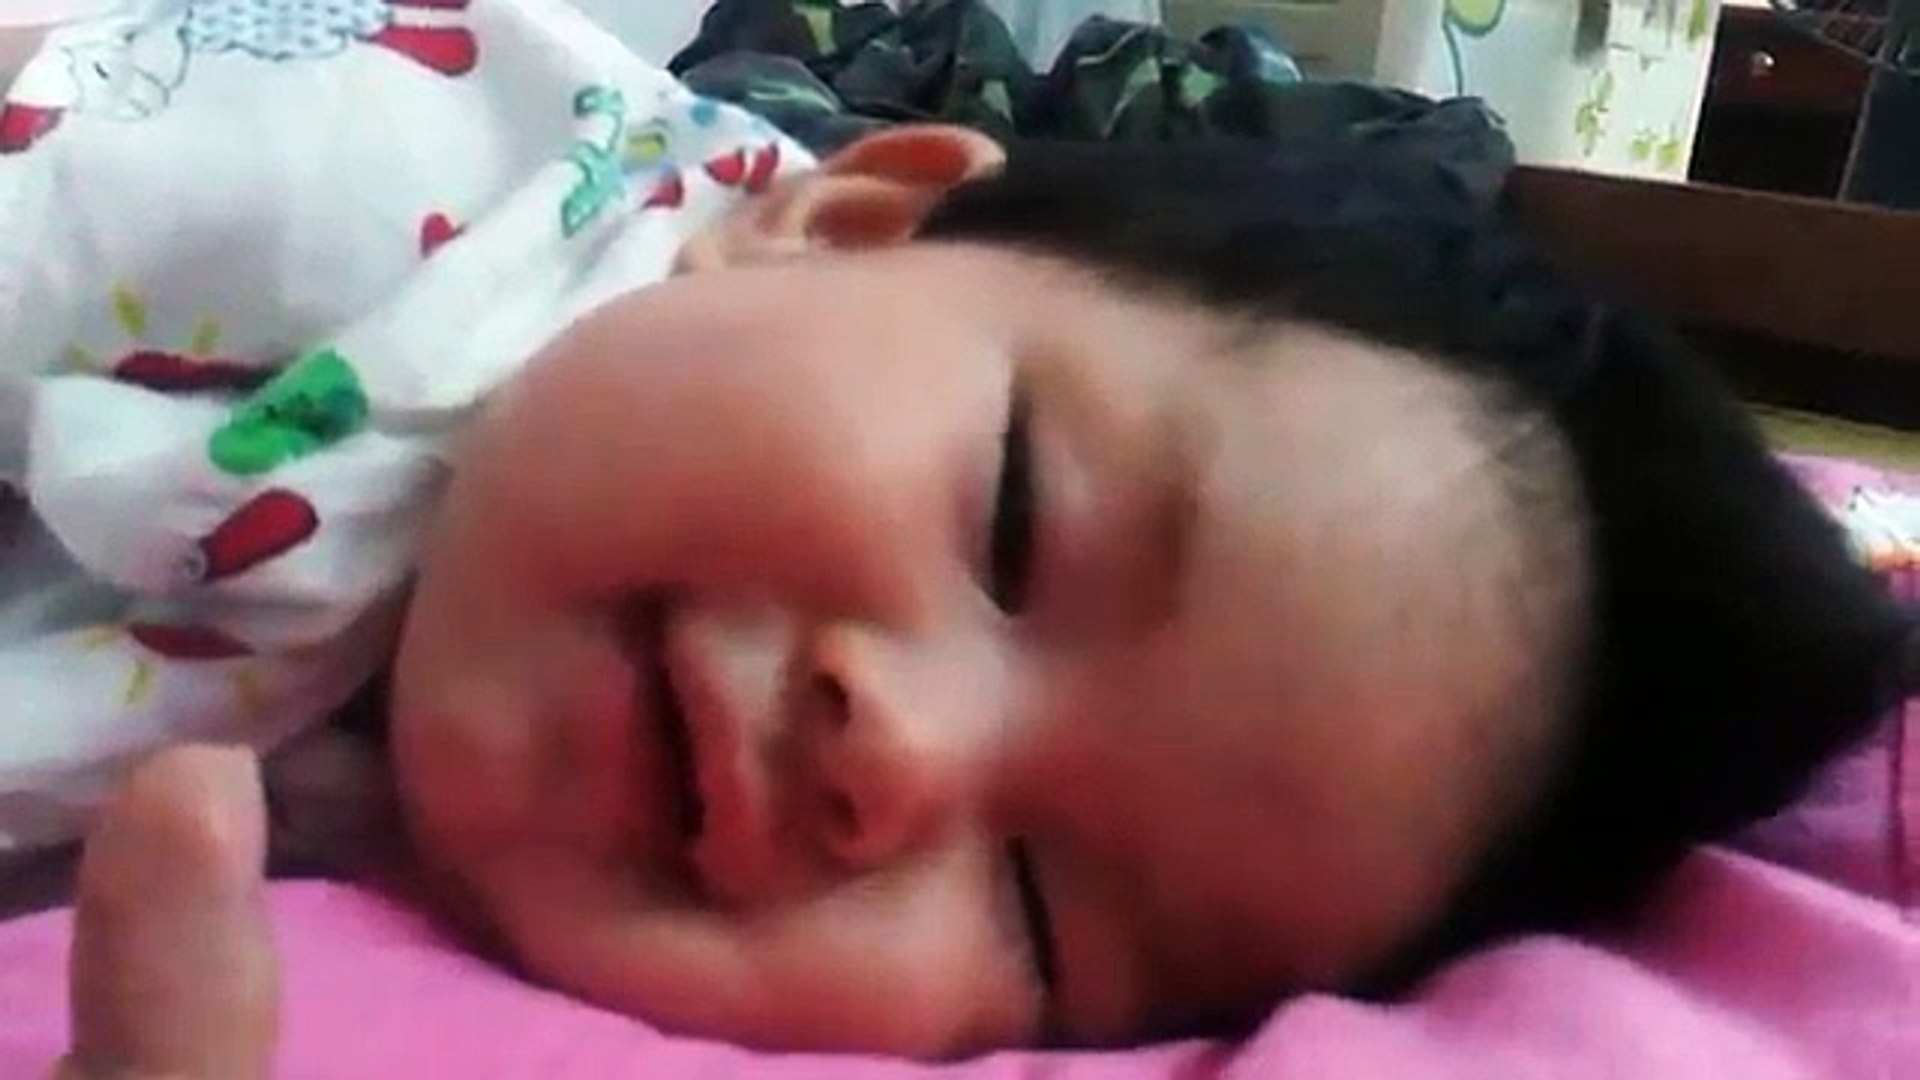 Funny Baby Video, Baby laughing funny videos, Baby sleep funny video, baby sleep music